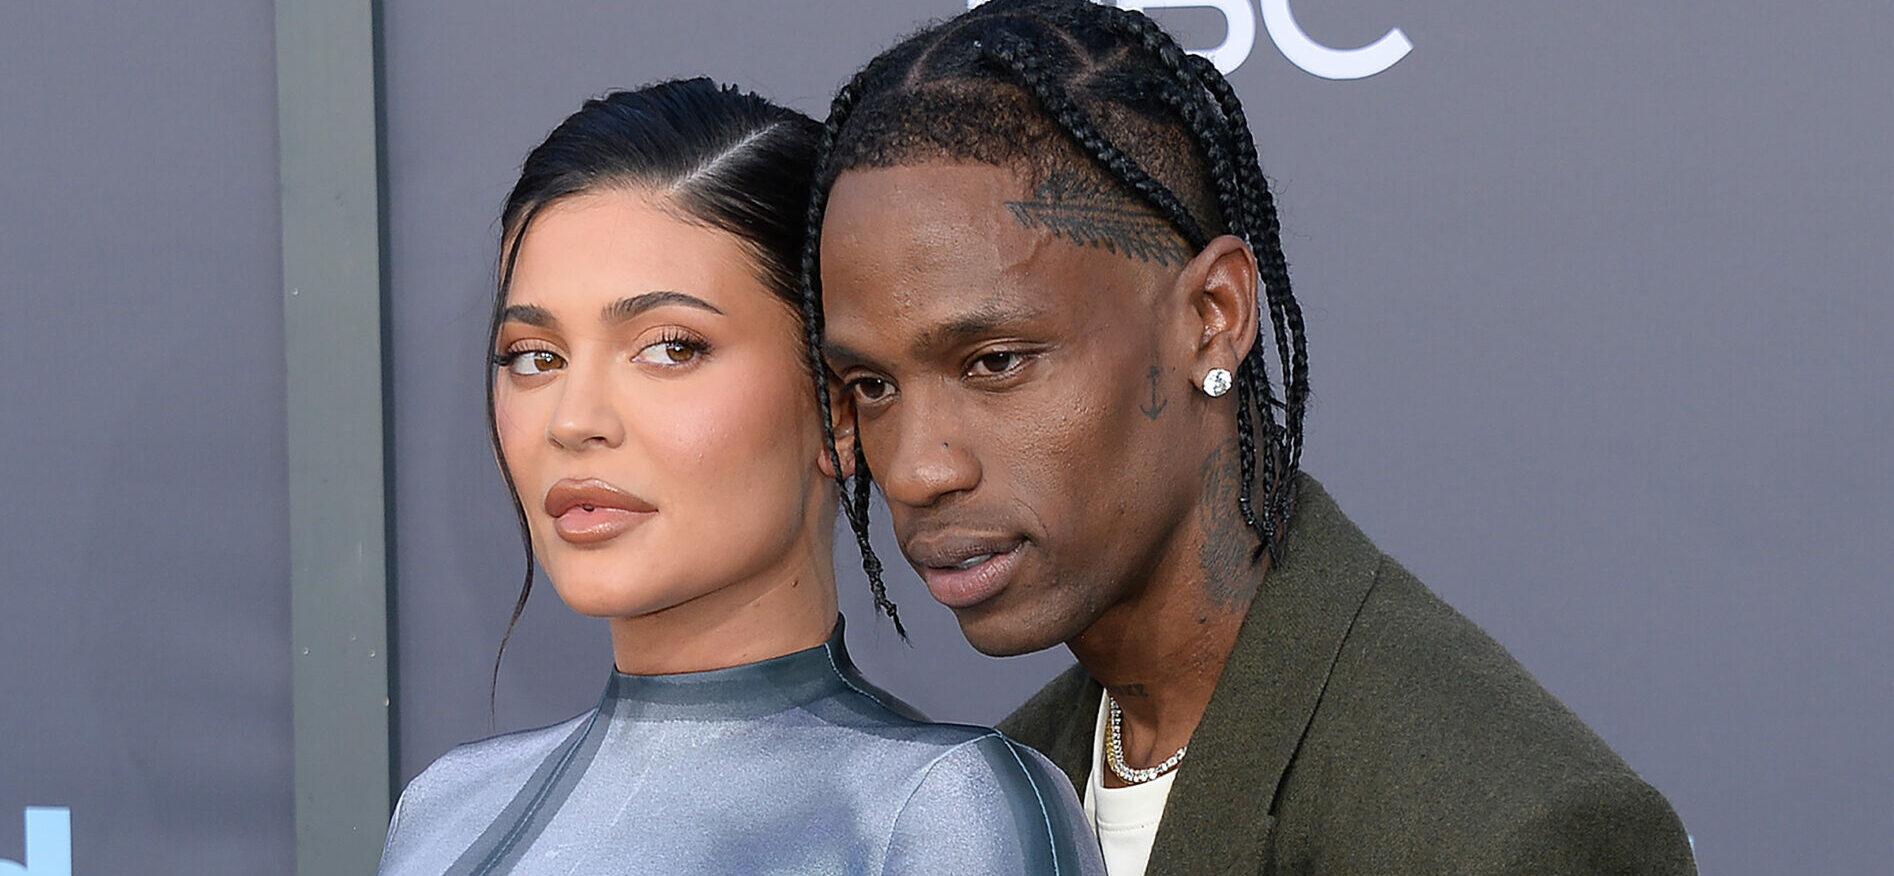 Travis Scott THIRSTS Over Kylie Jenner’s Assets In Rare IG Post